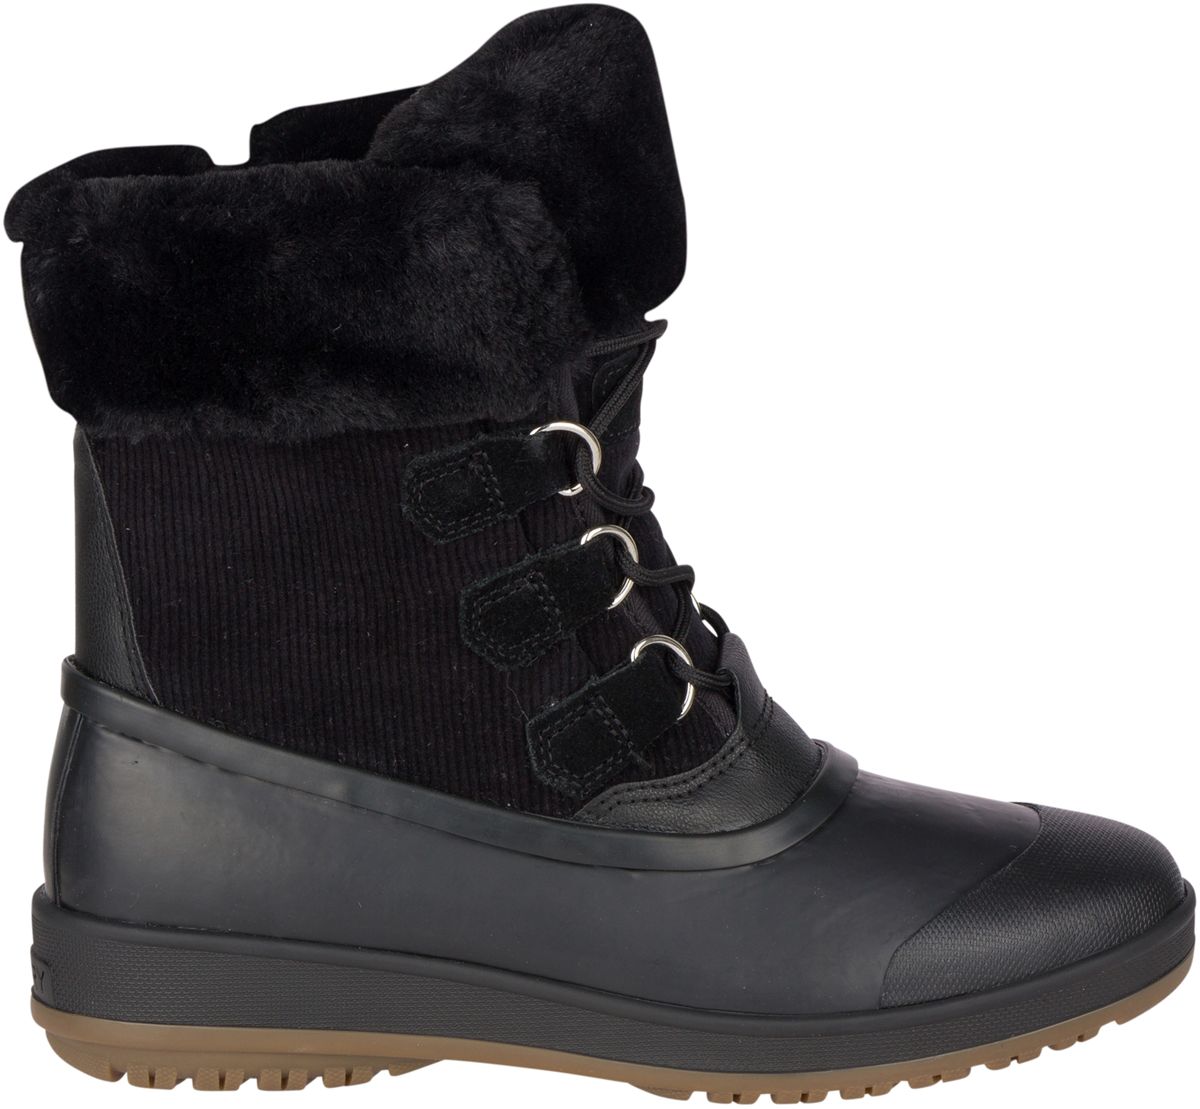 Pacifica Alpine Boot - Boots | Sperry